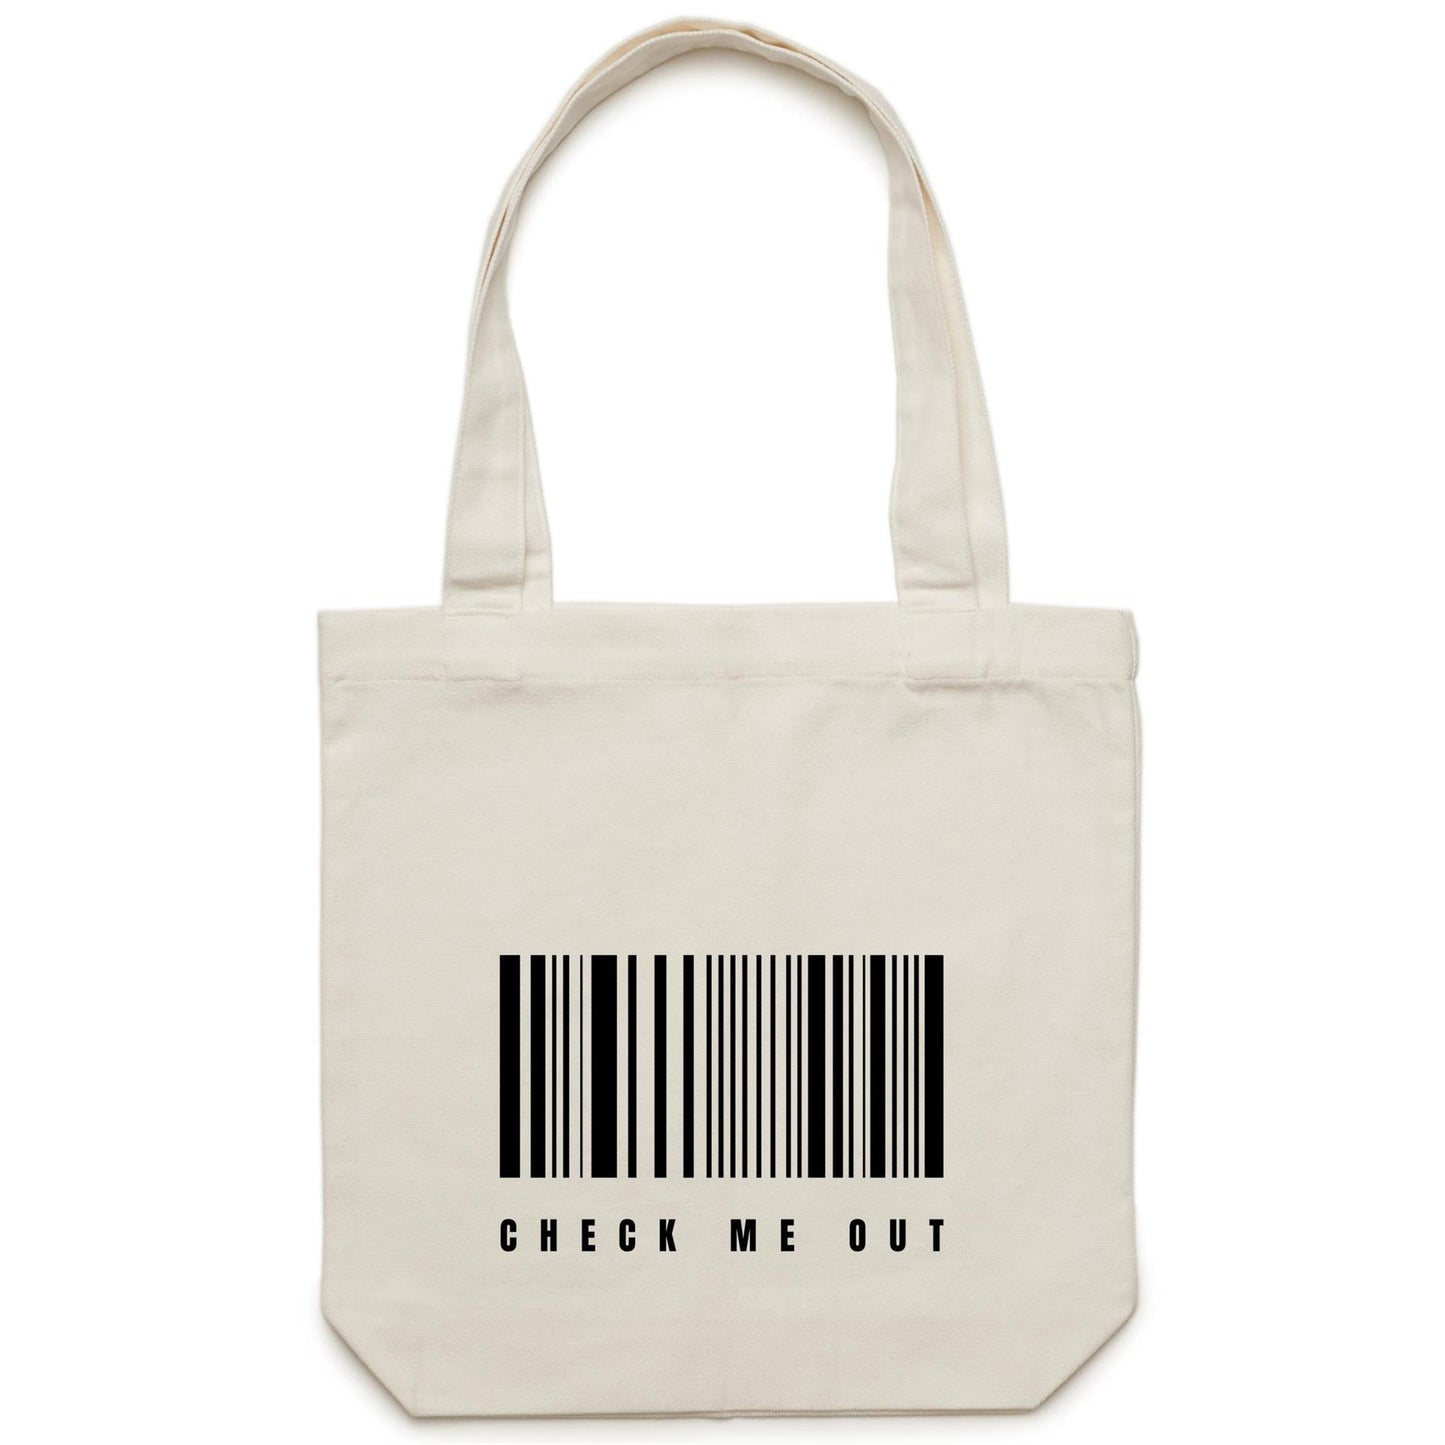 Current Mood 'CHECK ME OUT' - Carrie - Canvas Tote Bag